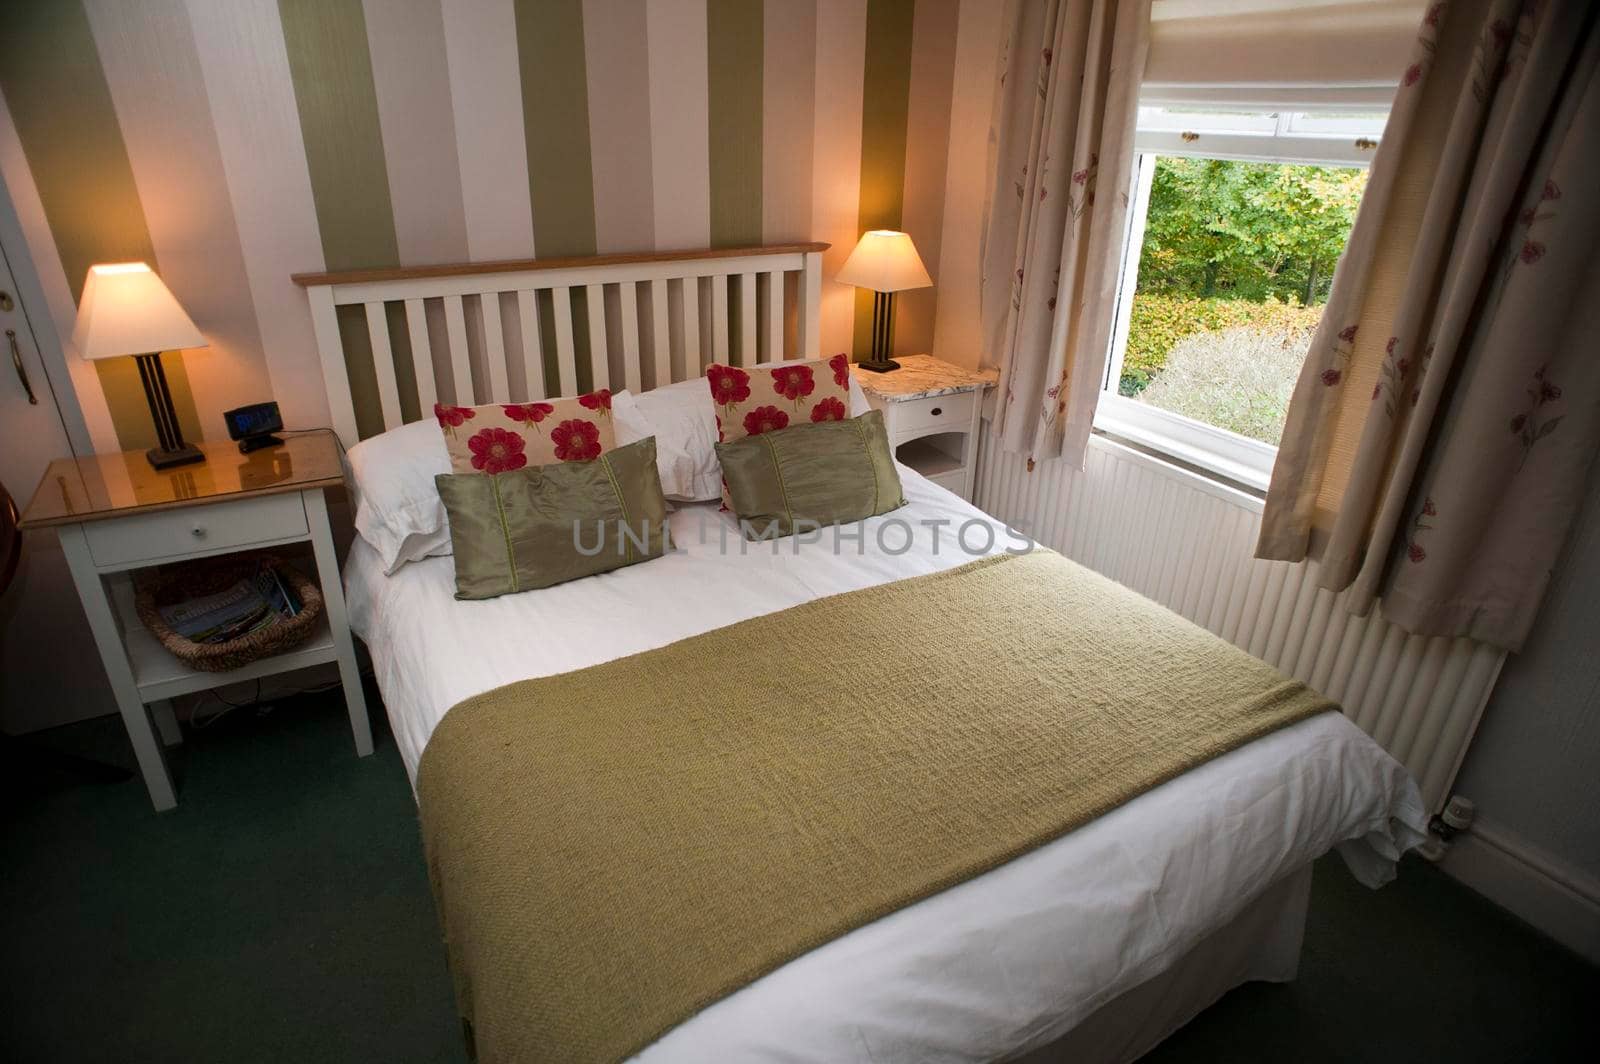 Homely bedroom interior with a double bed and lighted lamps on bedside tables alongside a window with a garden view and striped wallpaper